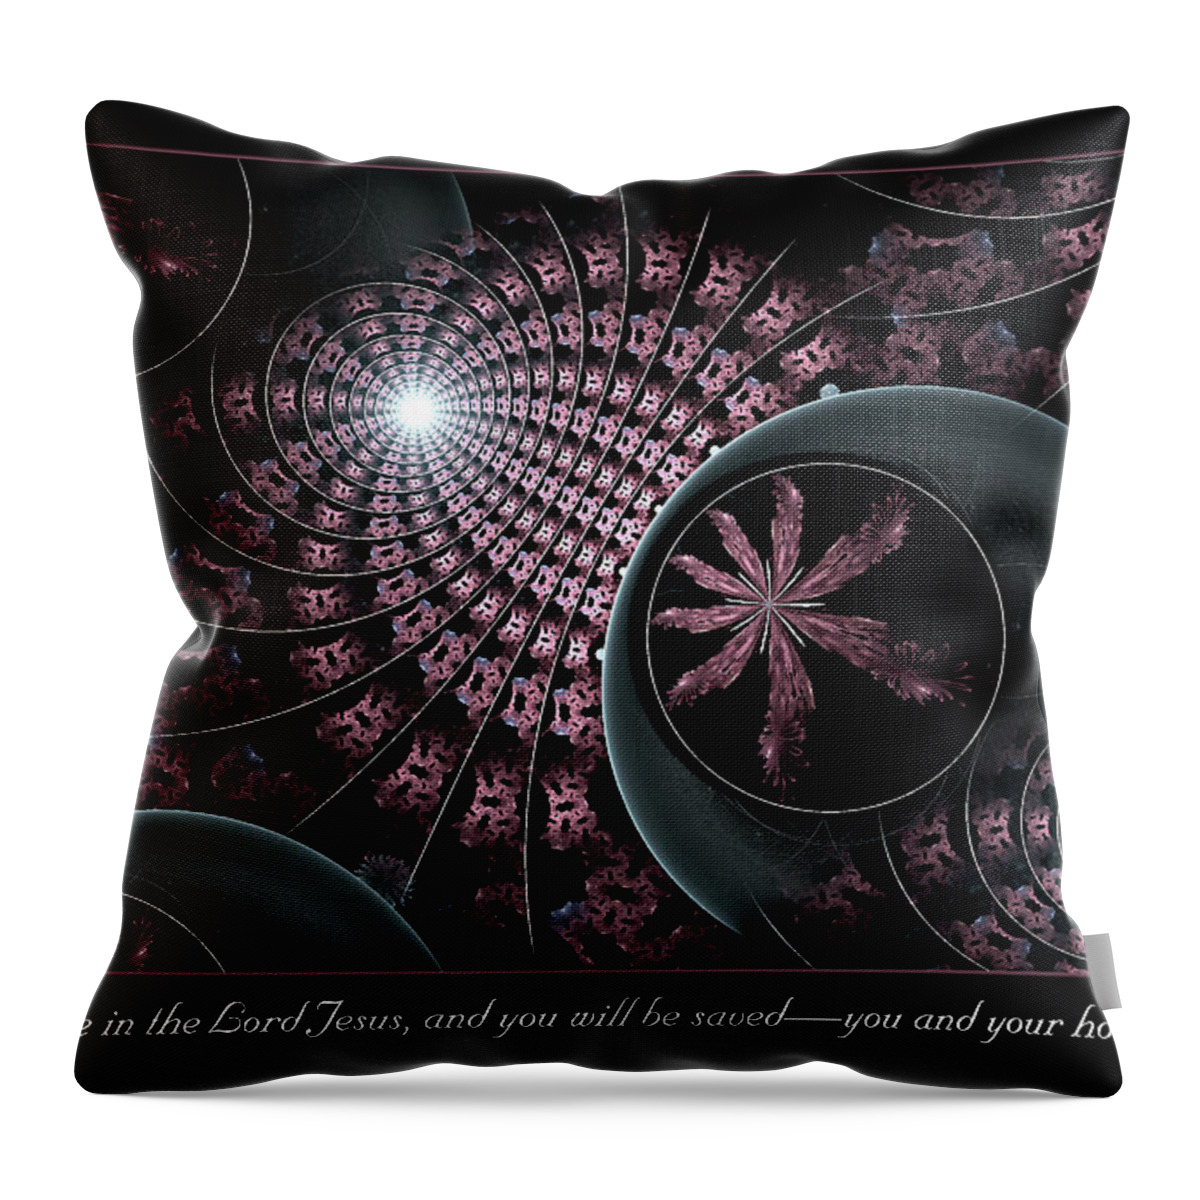 Fractals Throw Pillow featuring the digital art You and Your Household by Missy Gainer